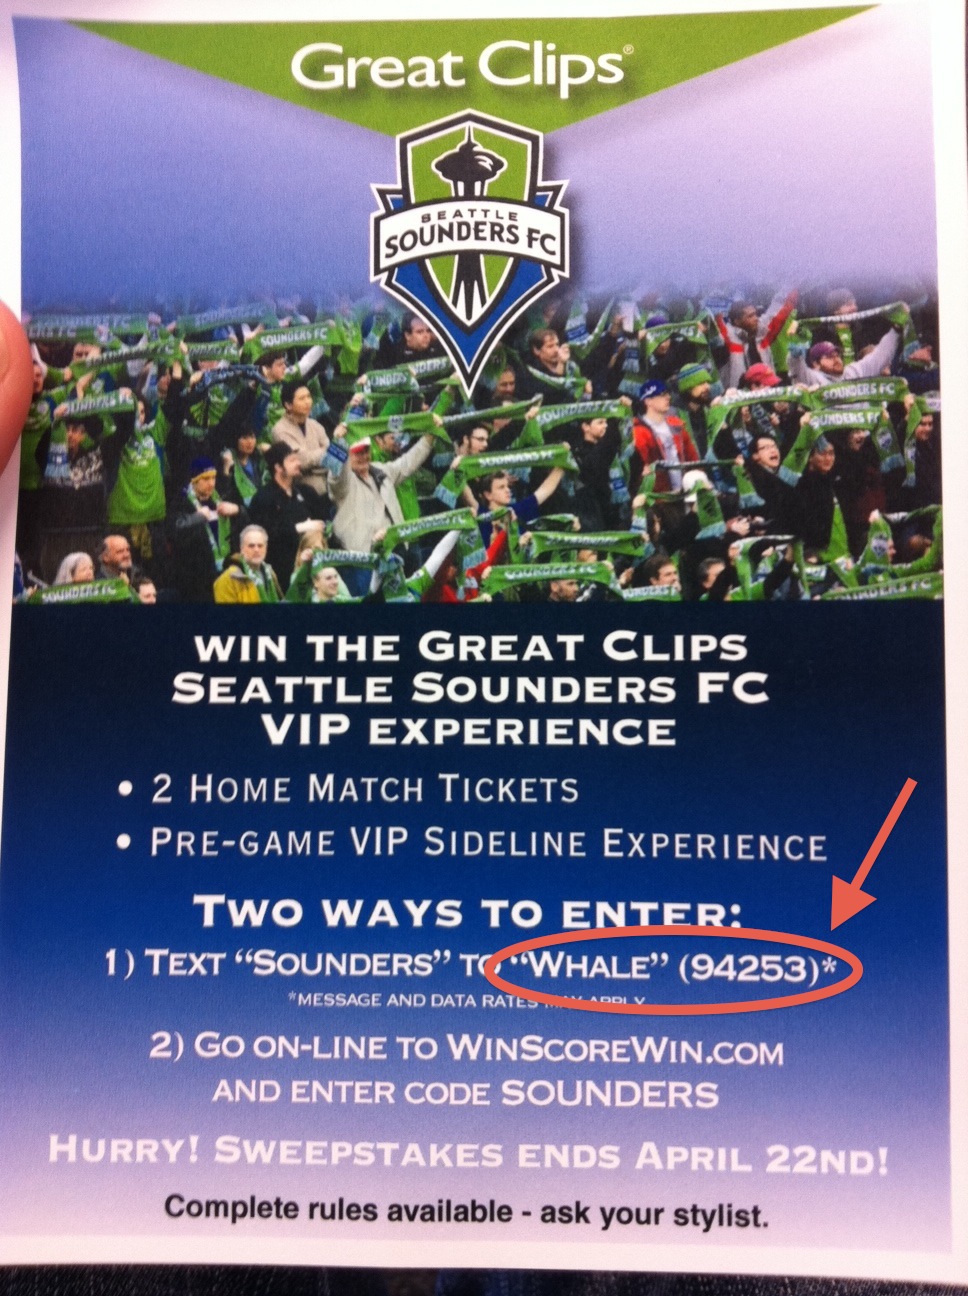 Advertisement for SMS marketing campaign with Great Clips and Seattle Sounders FC